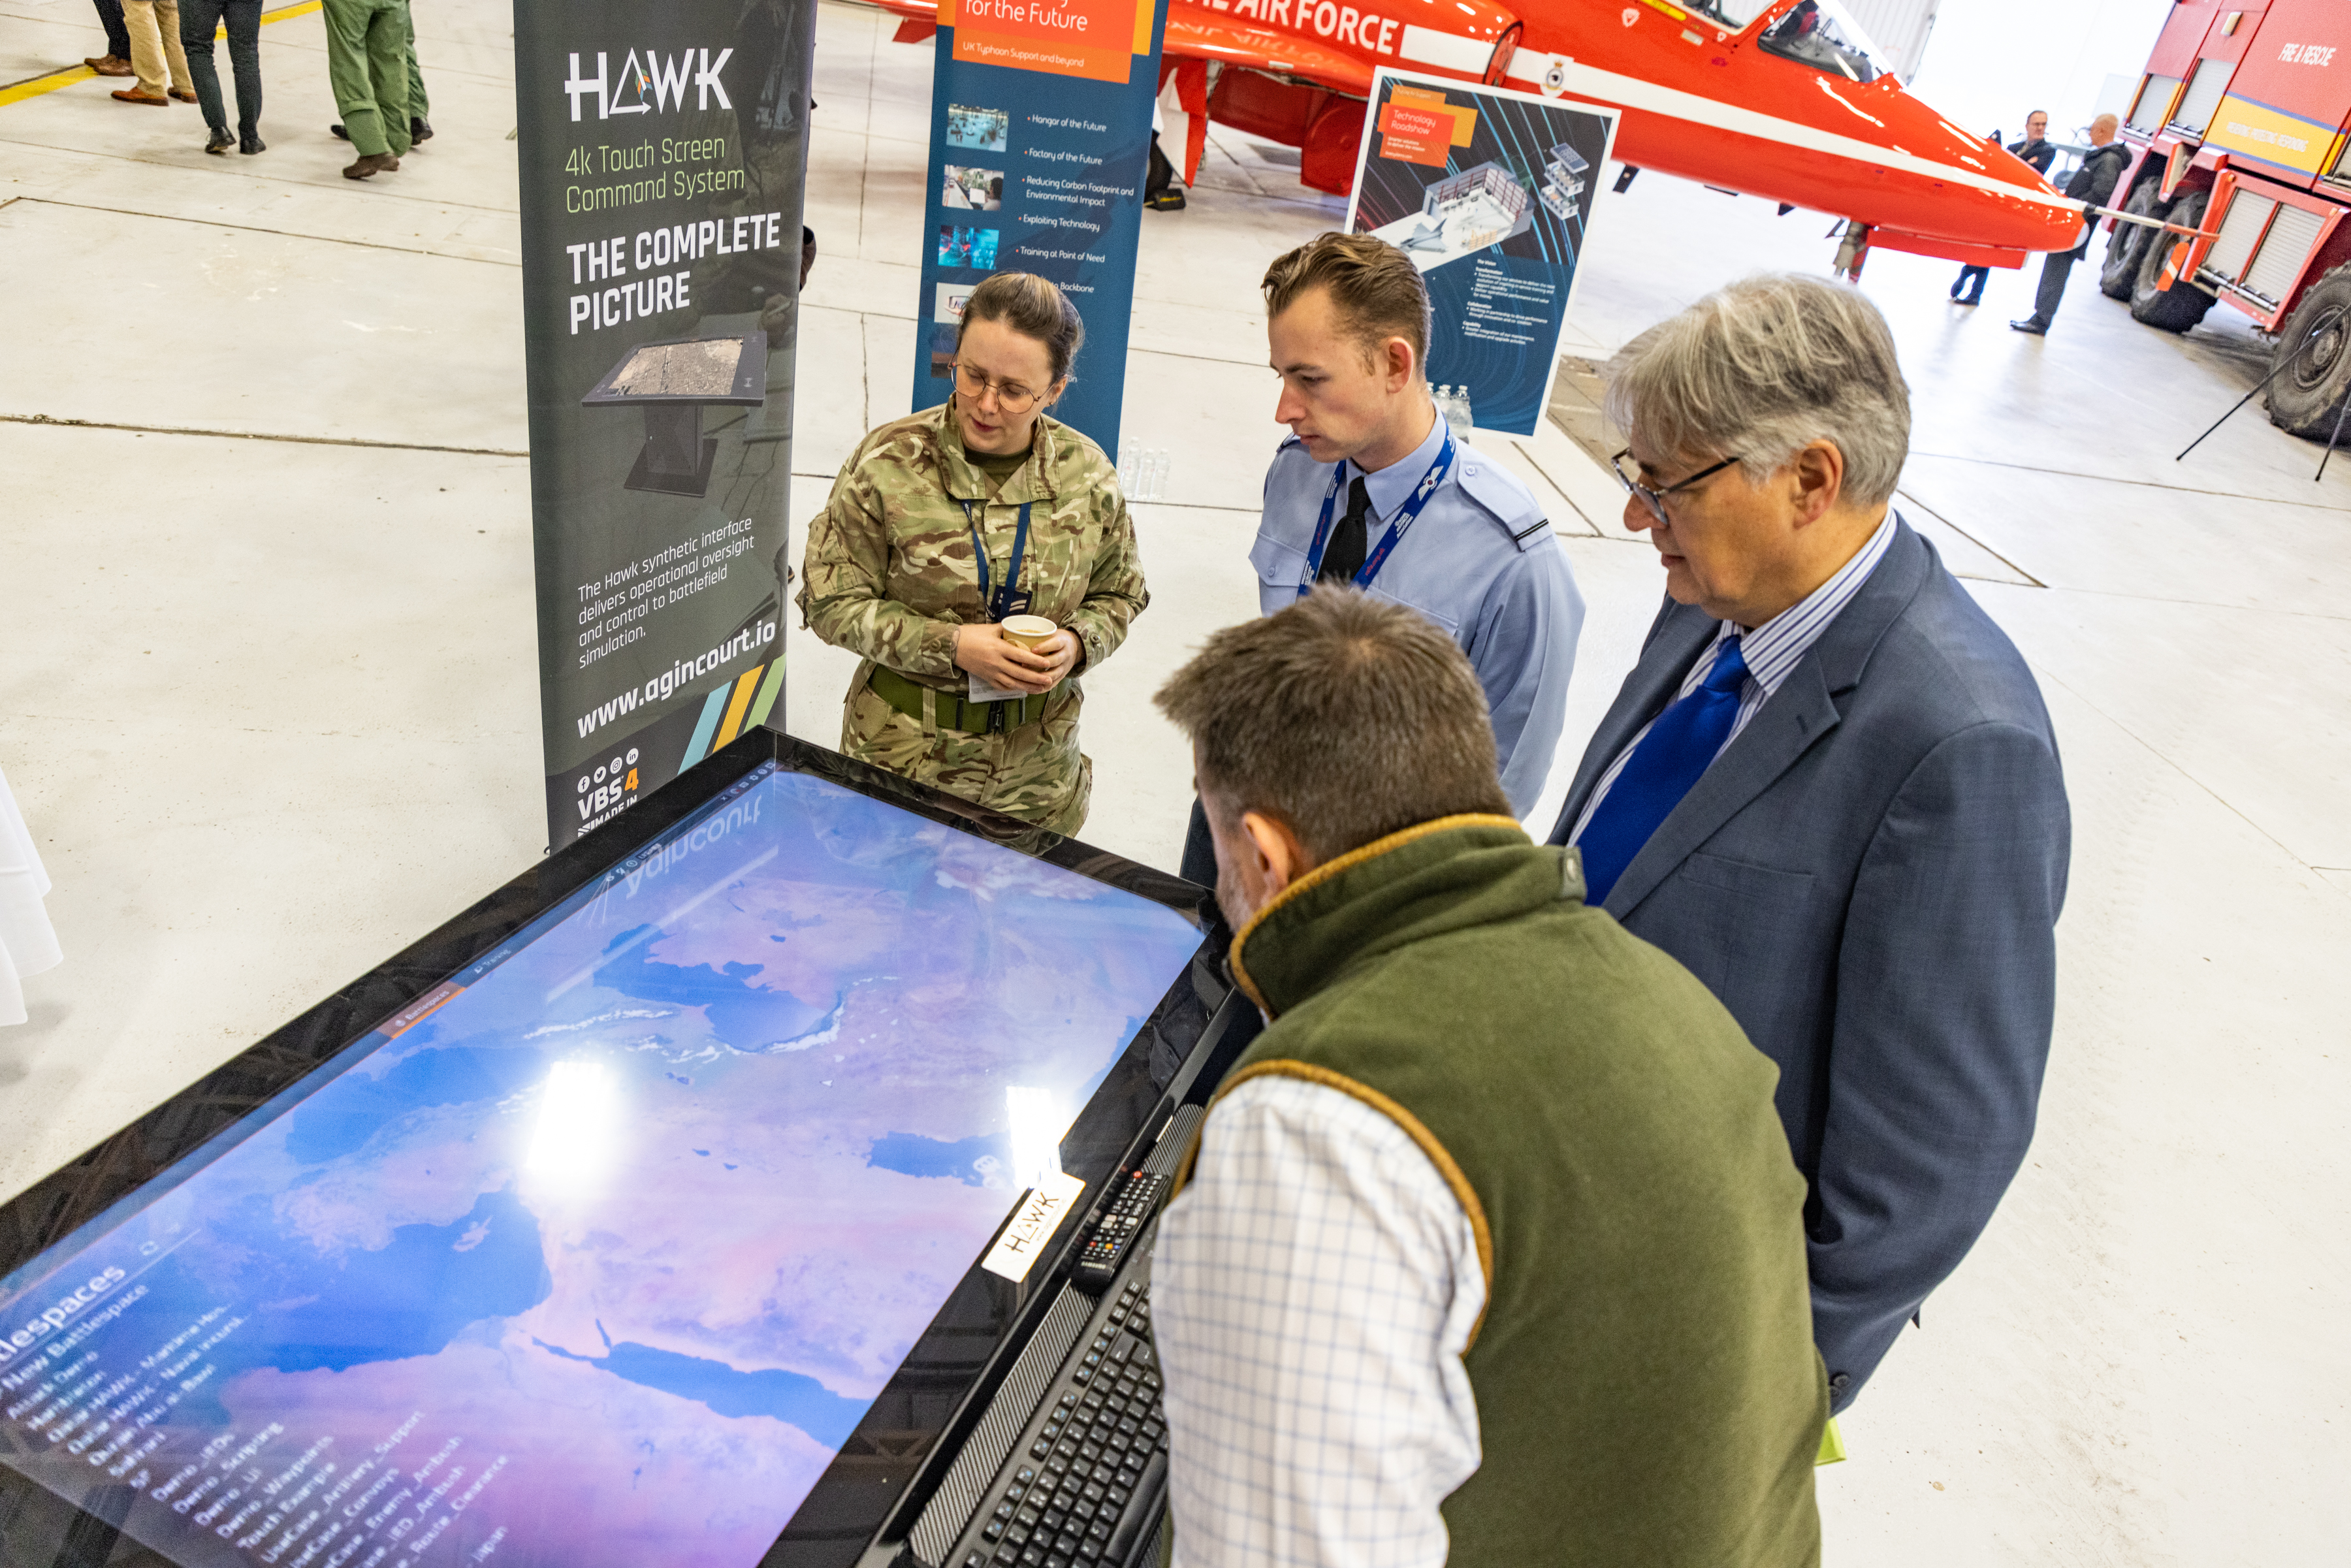 Image shows personnel and civilians looking at a digital screen in a RAF Museum.